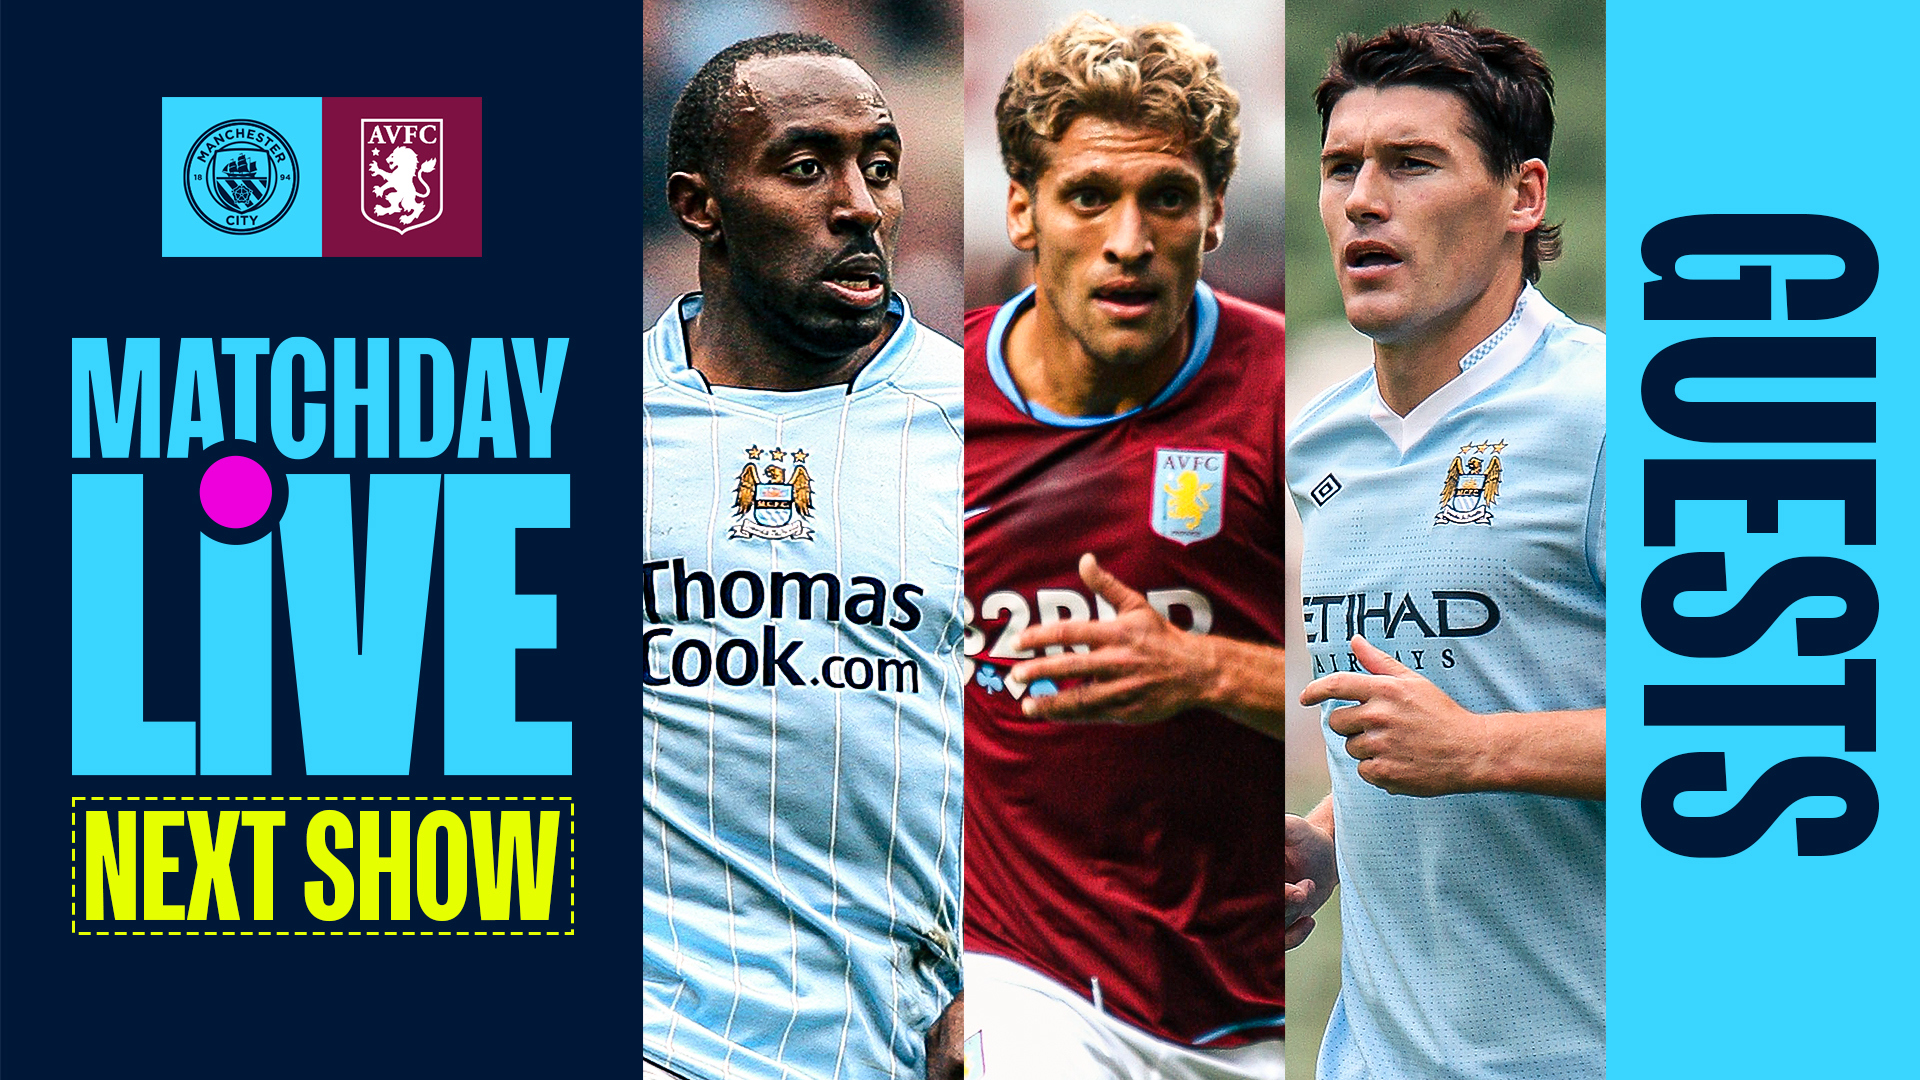 City v Villa Barry, Petrov and Vassell our Matchday Live guests